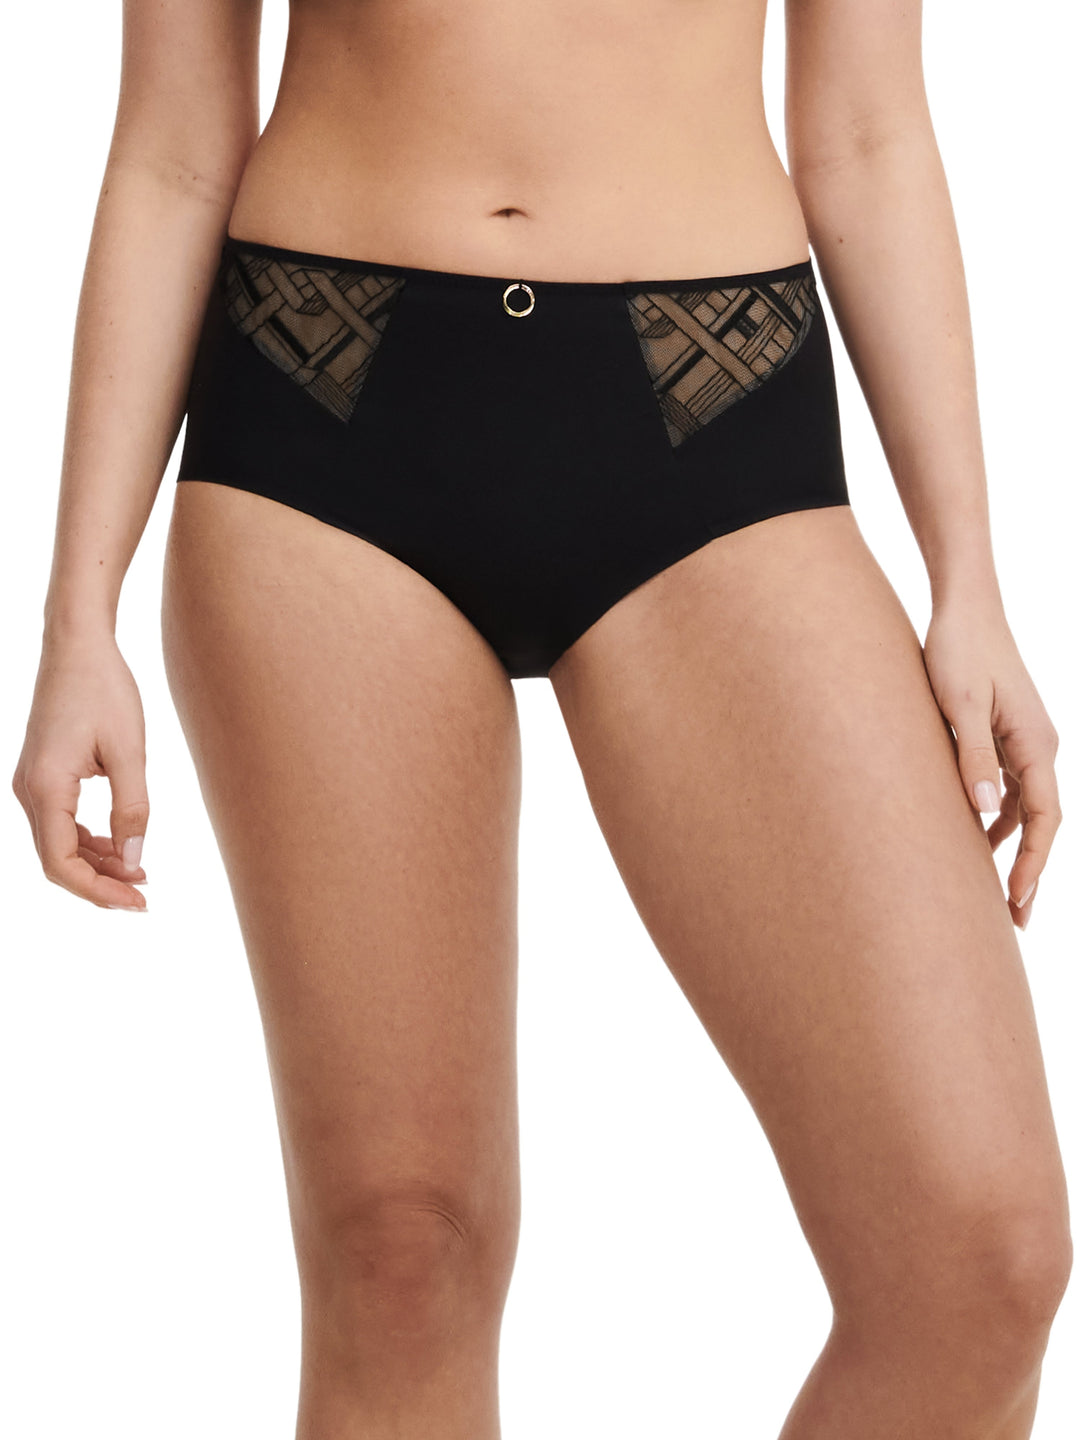 Chantelle - Graphic Support High Waisted Support Full Brief Schwarzer Full Brief Chantelle